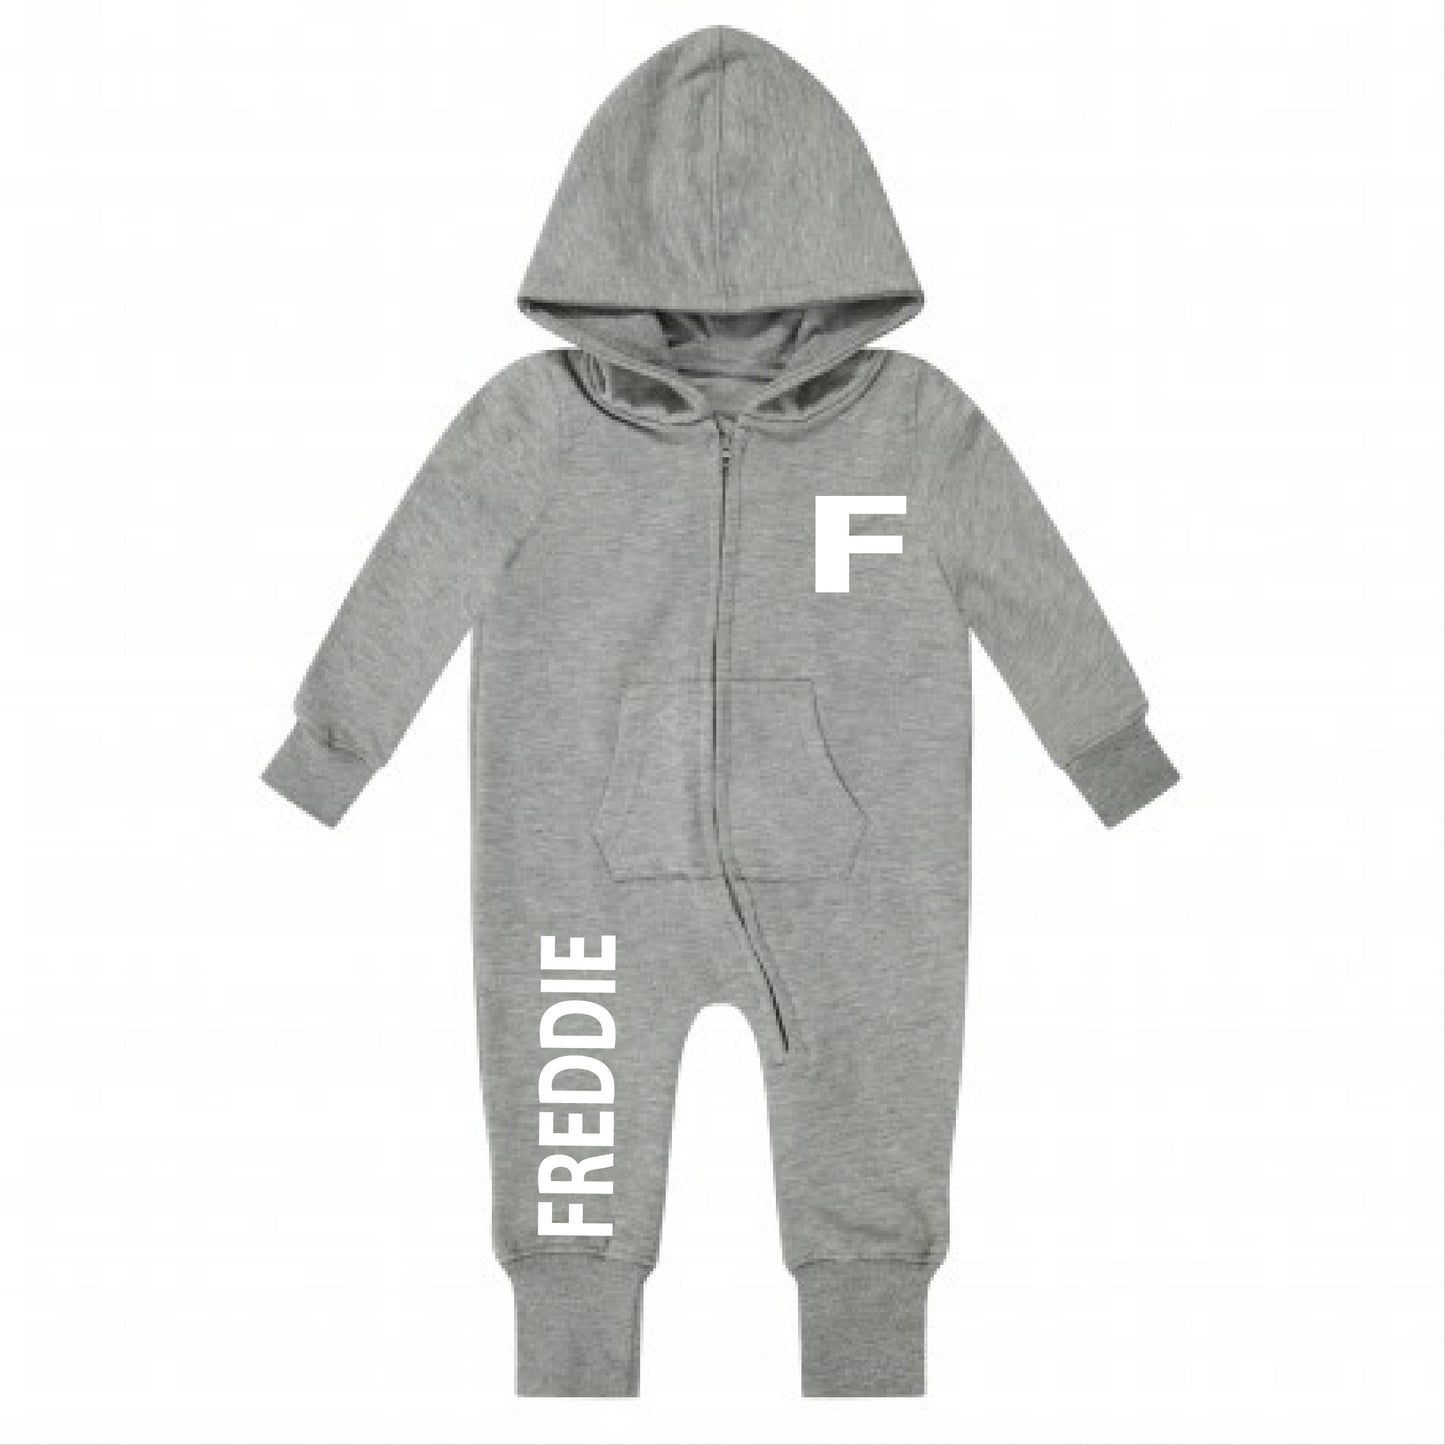 Personalised Kids Loungewear Onesie With Initial and Name on Front